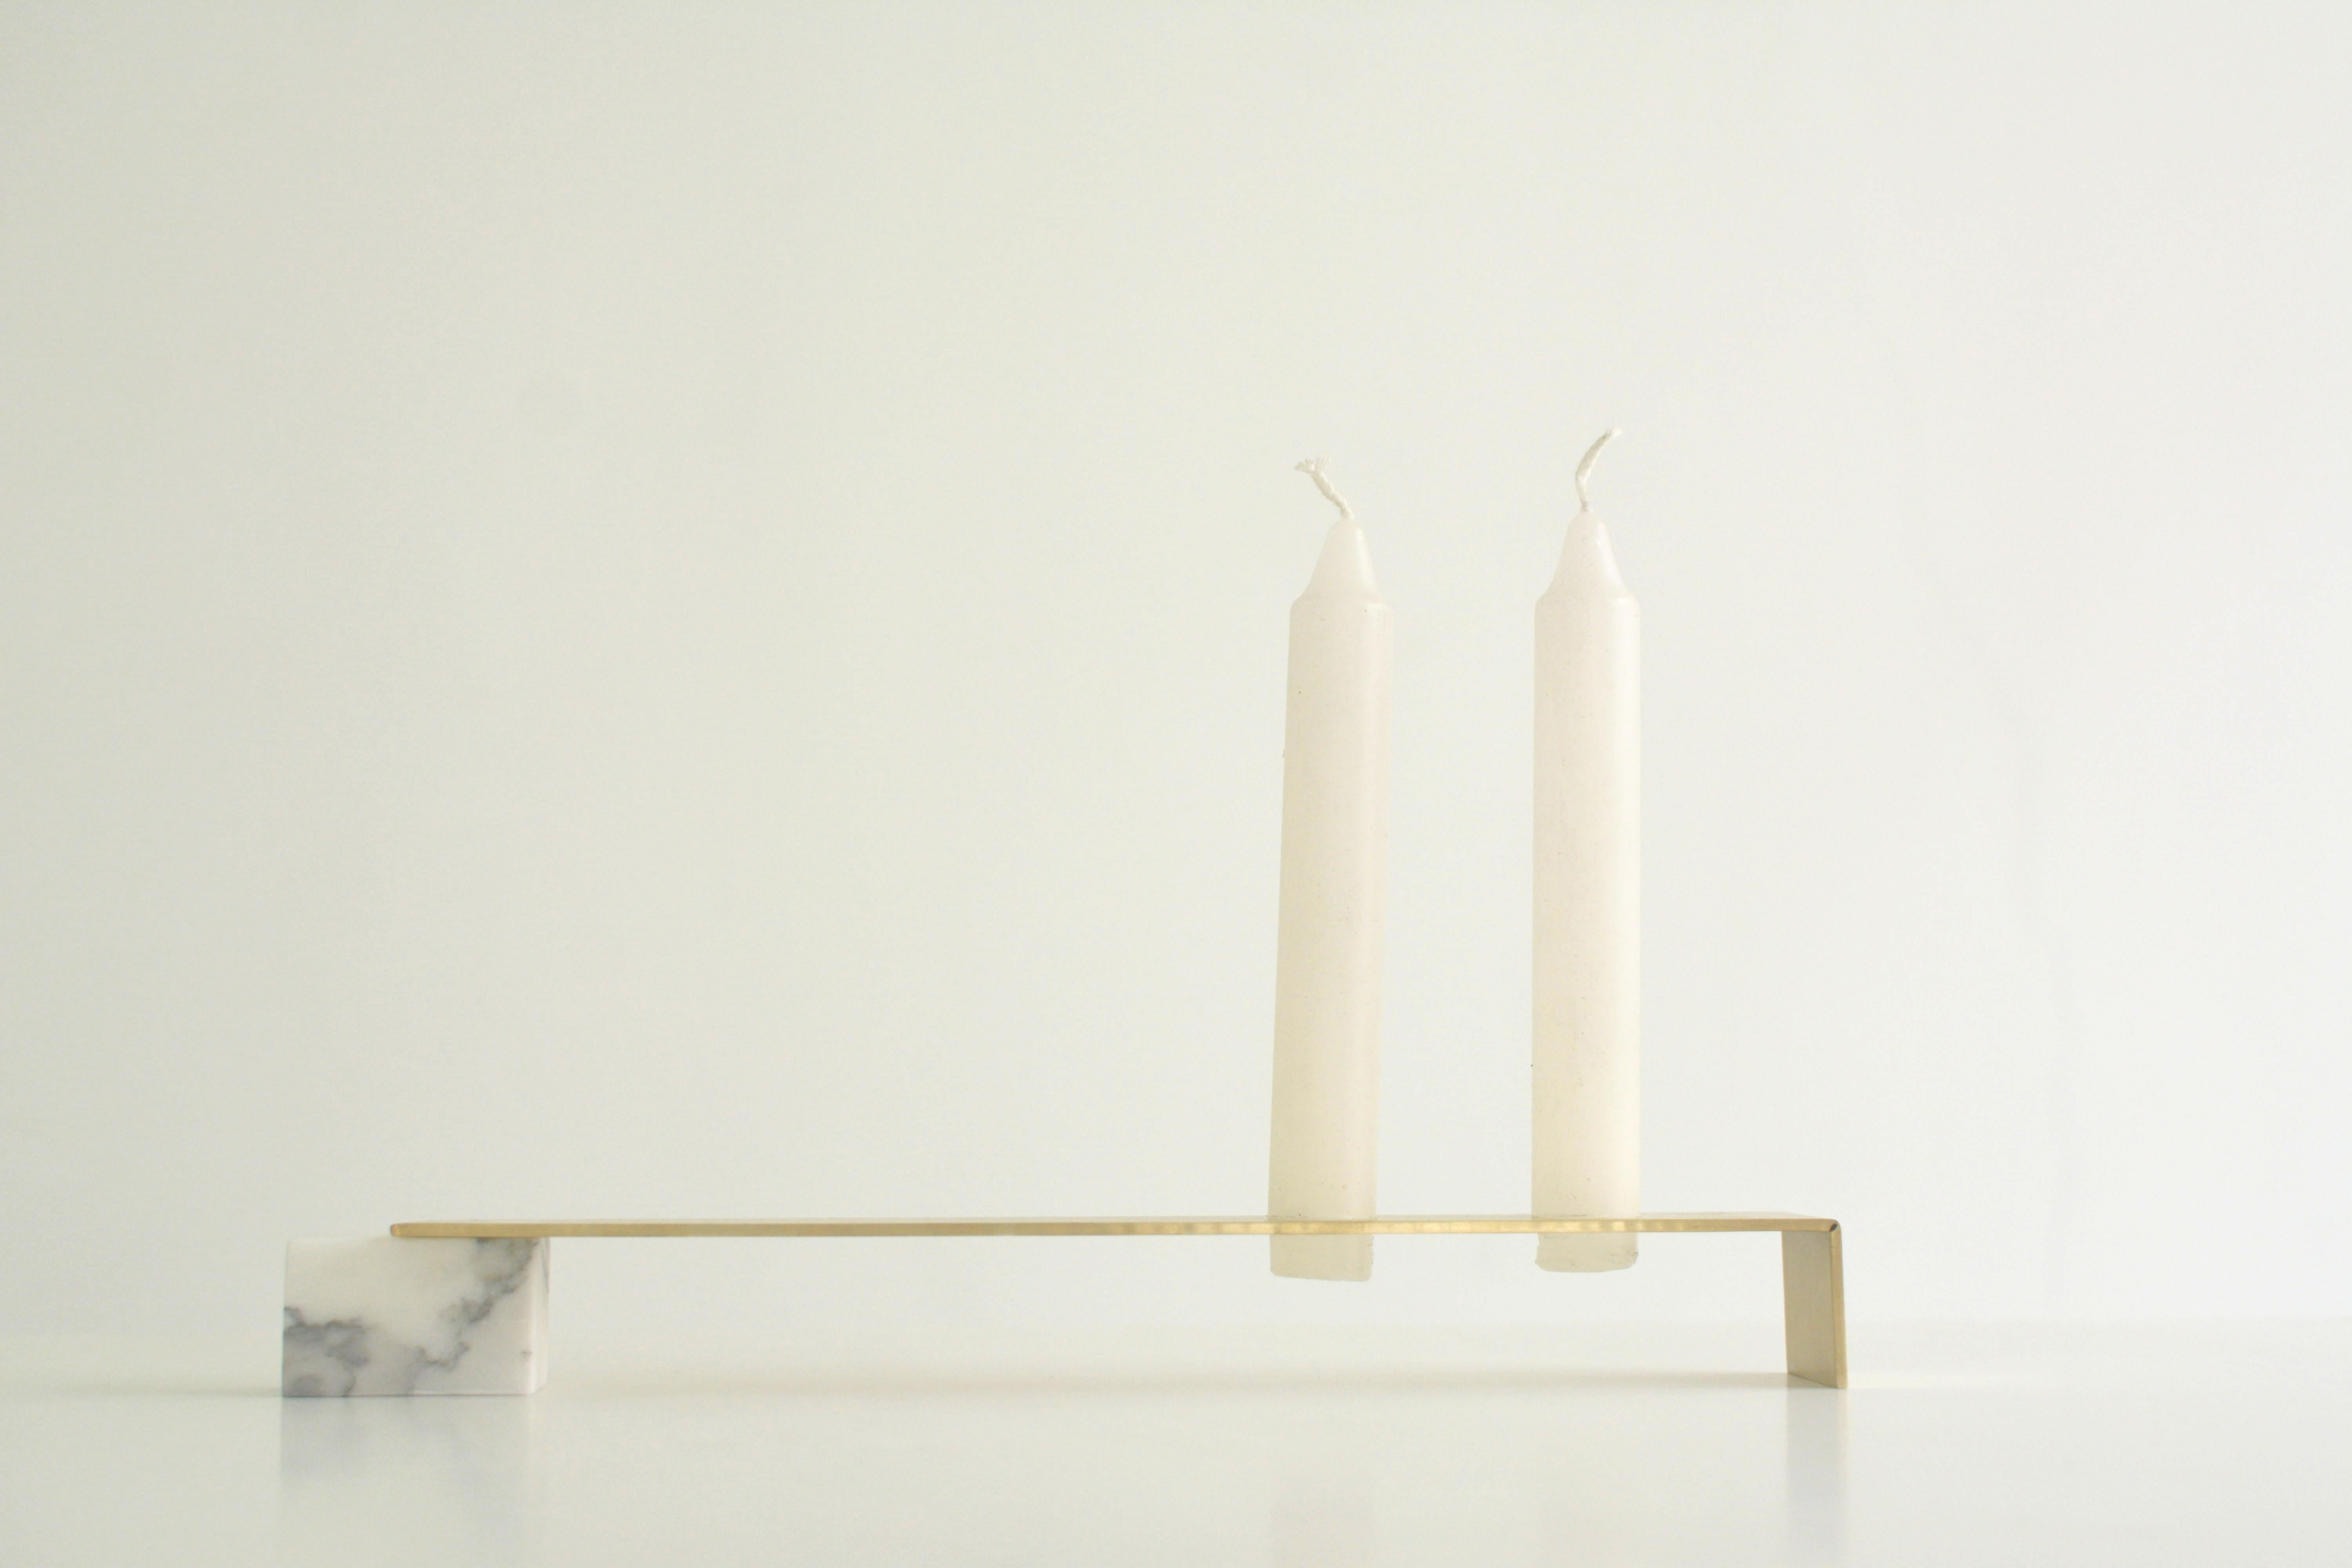 Unfolding marble candleholders by Periclis Frementitis
Edition of 5 pieces for 2021
Designer: Periclis Frementitis
Studio: HIGHDOTS
Dimensions: width 28cm
Materials: brass, marble Carrara.



